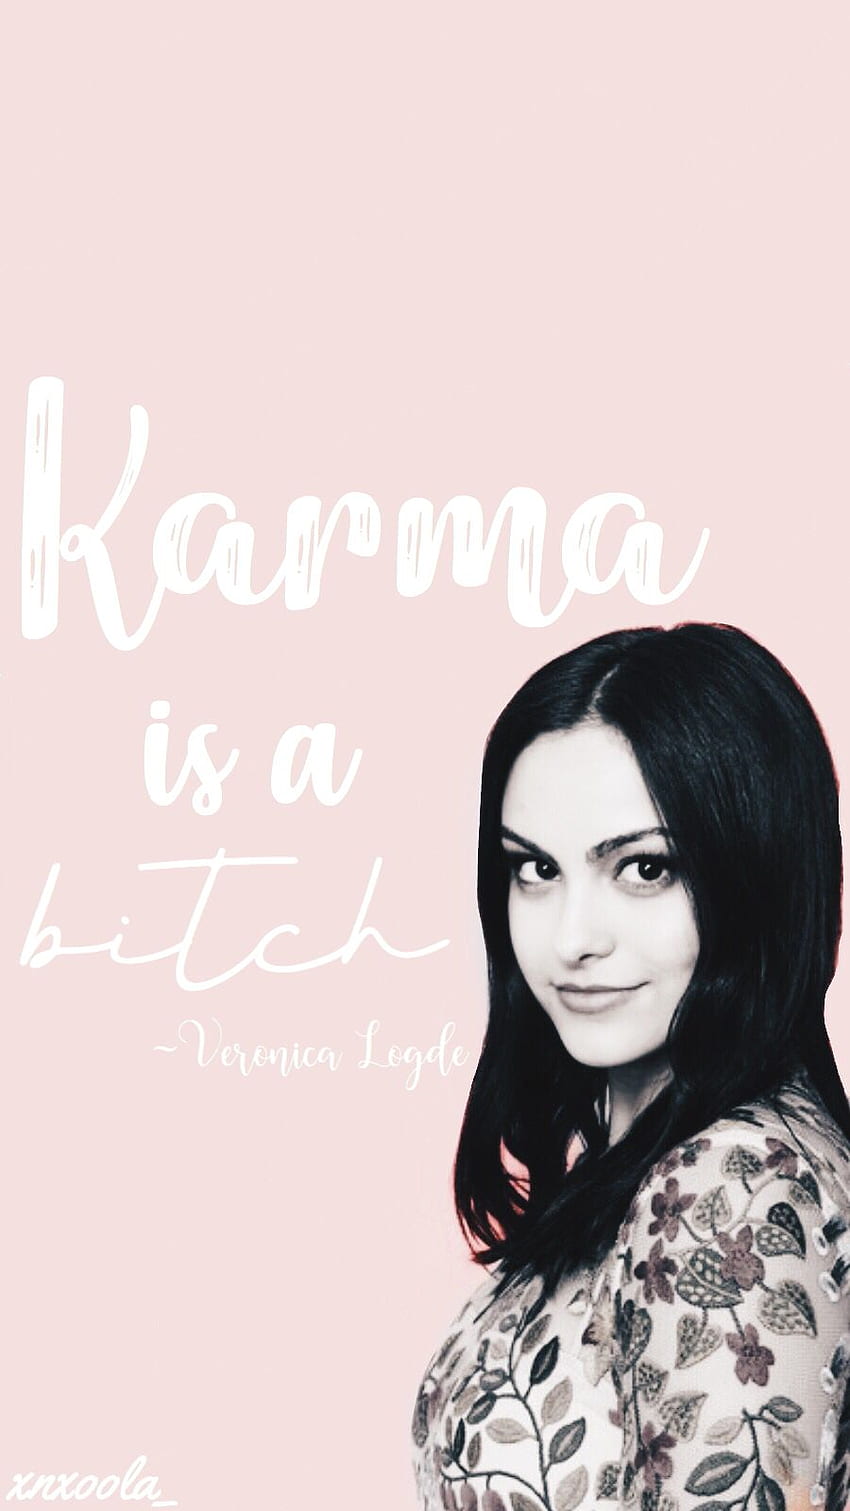 Veronica Lodge iPhone . Riverdale quotes, Riverdale poster, Riverdale HD phone wallpaper